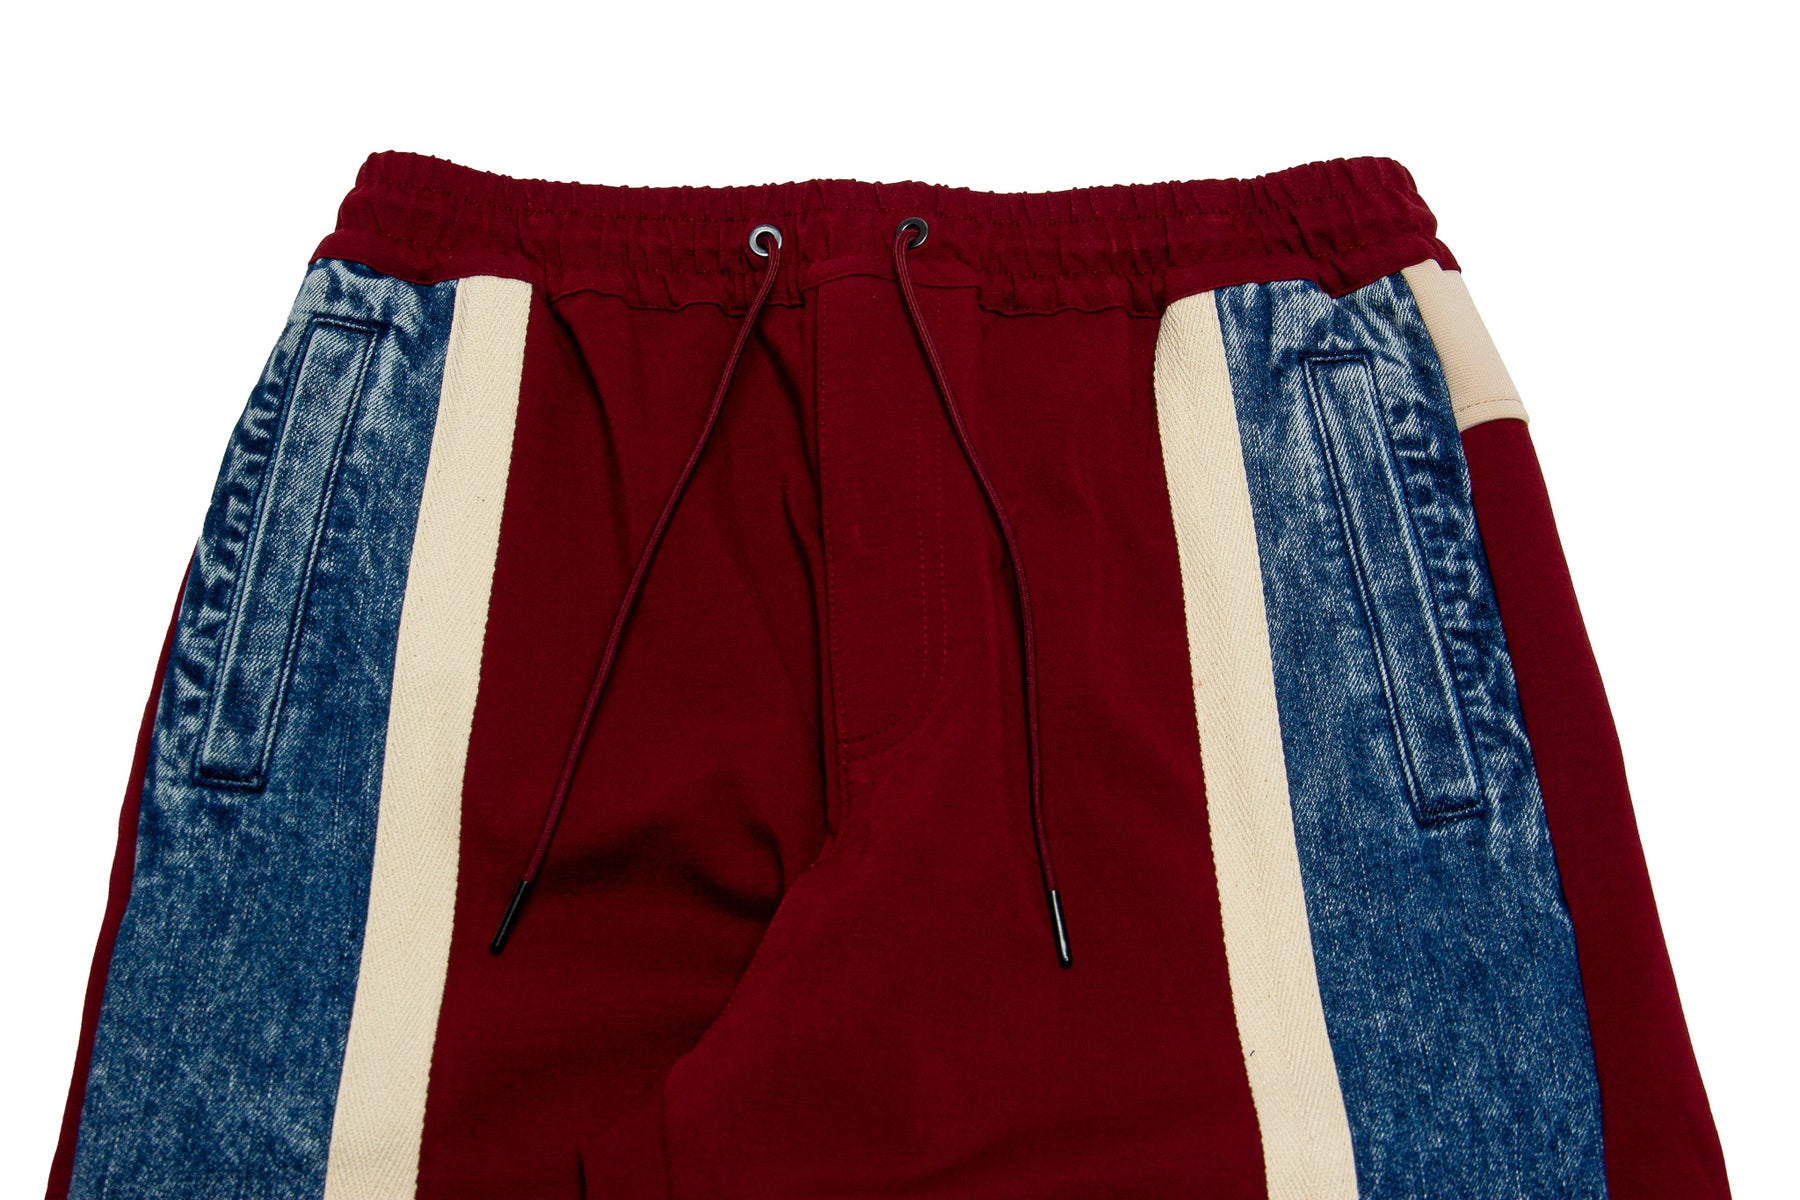 AlphaStyle Chase Track Pants "Wine"